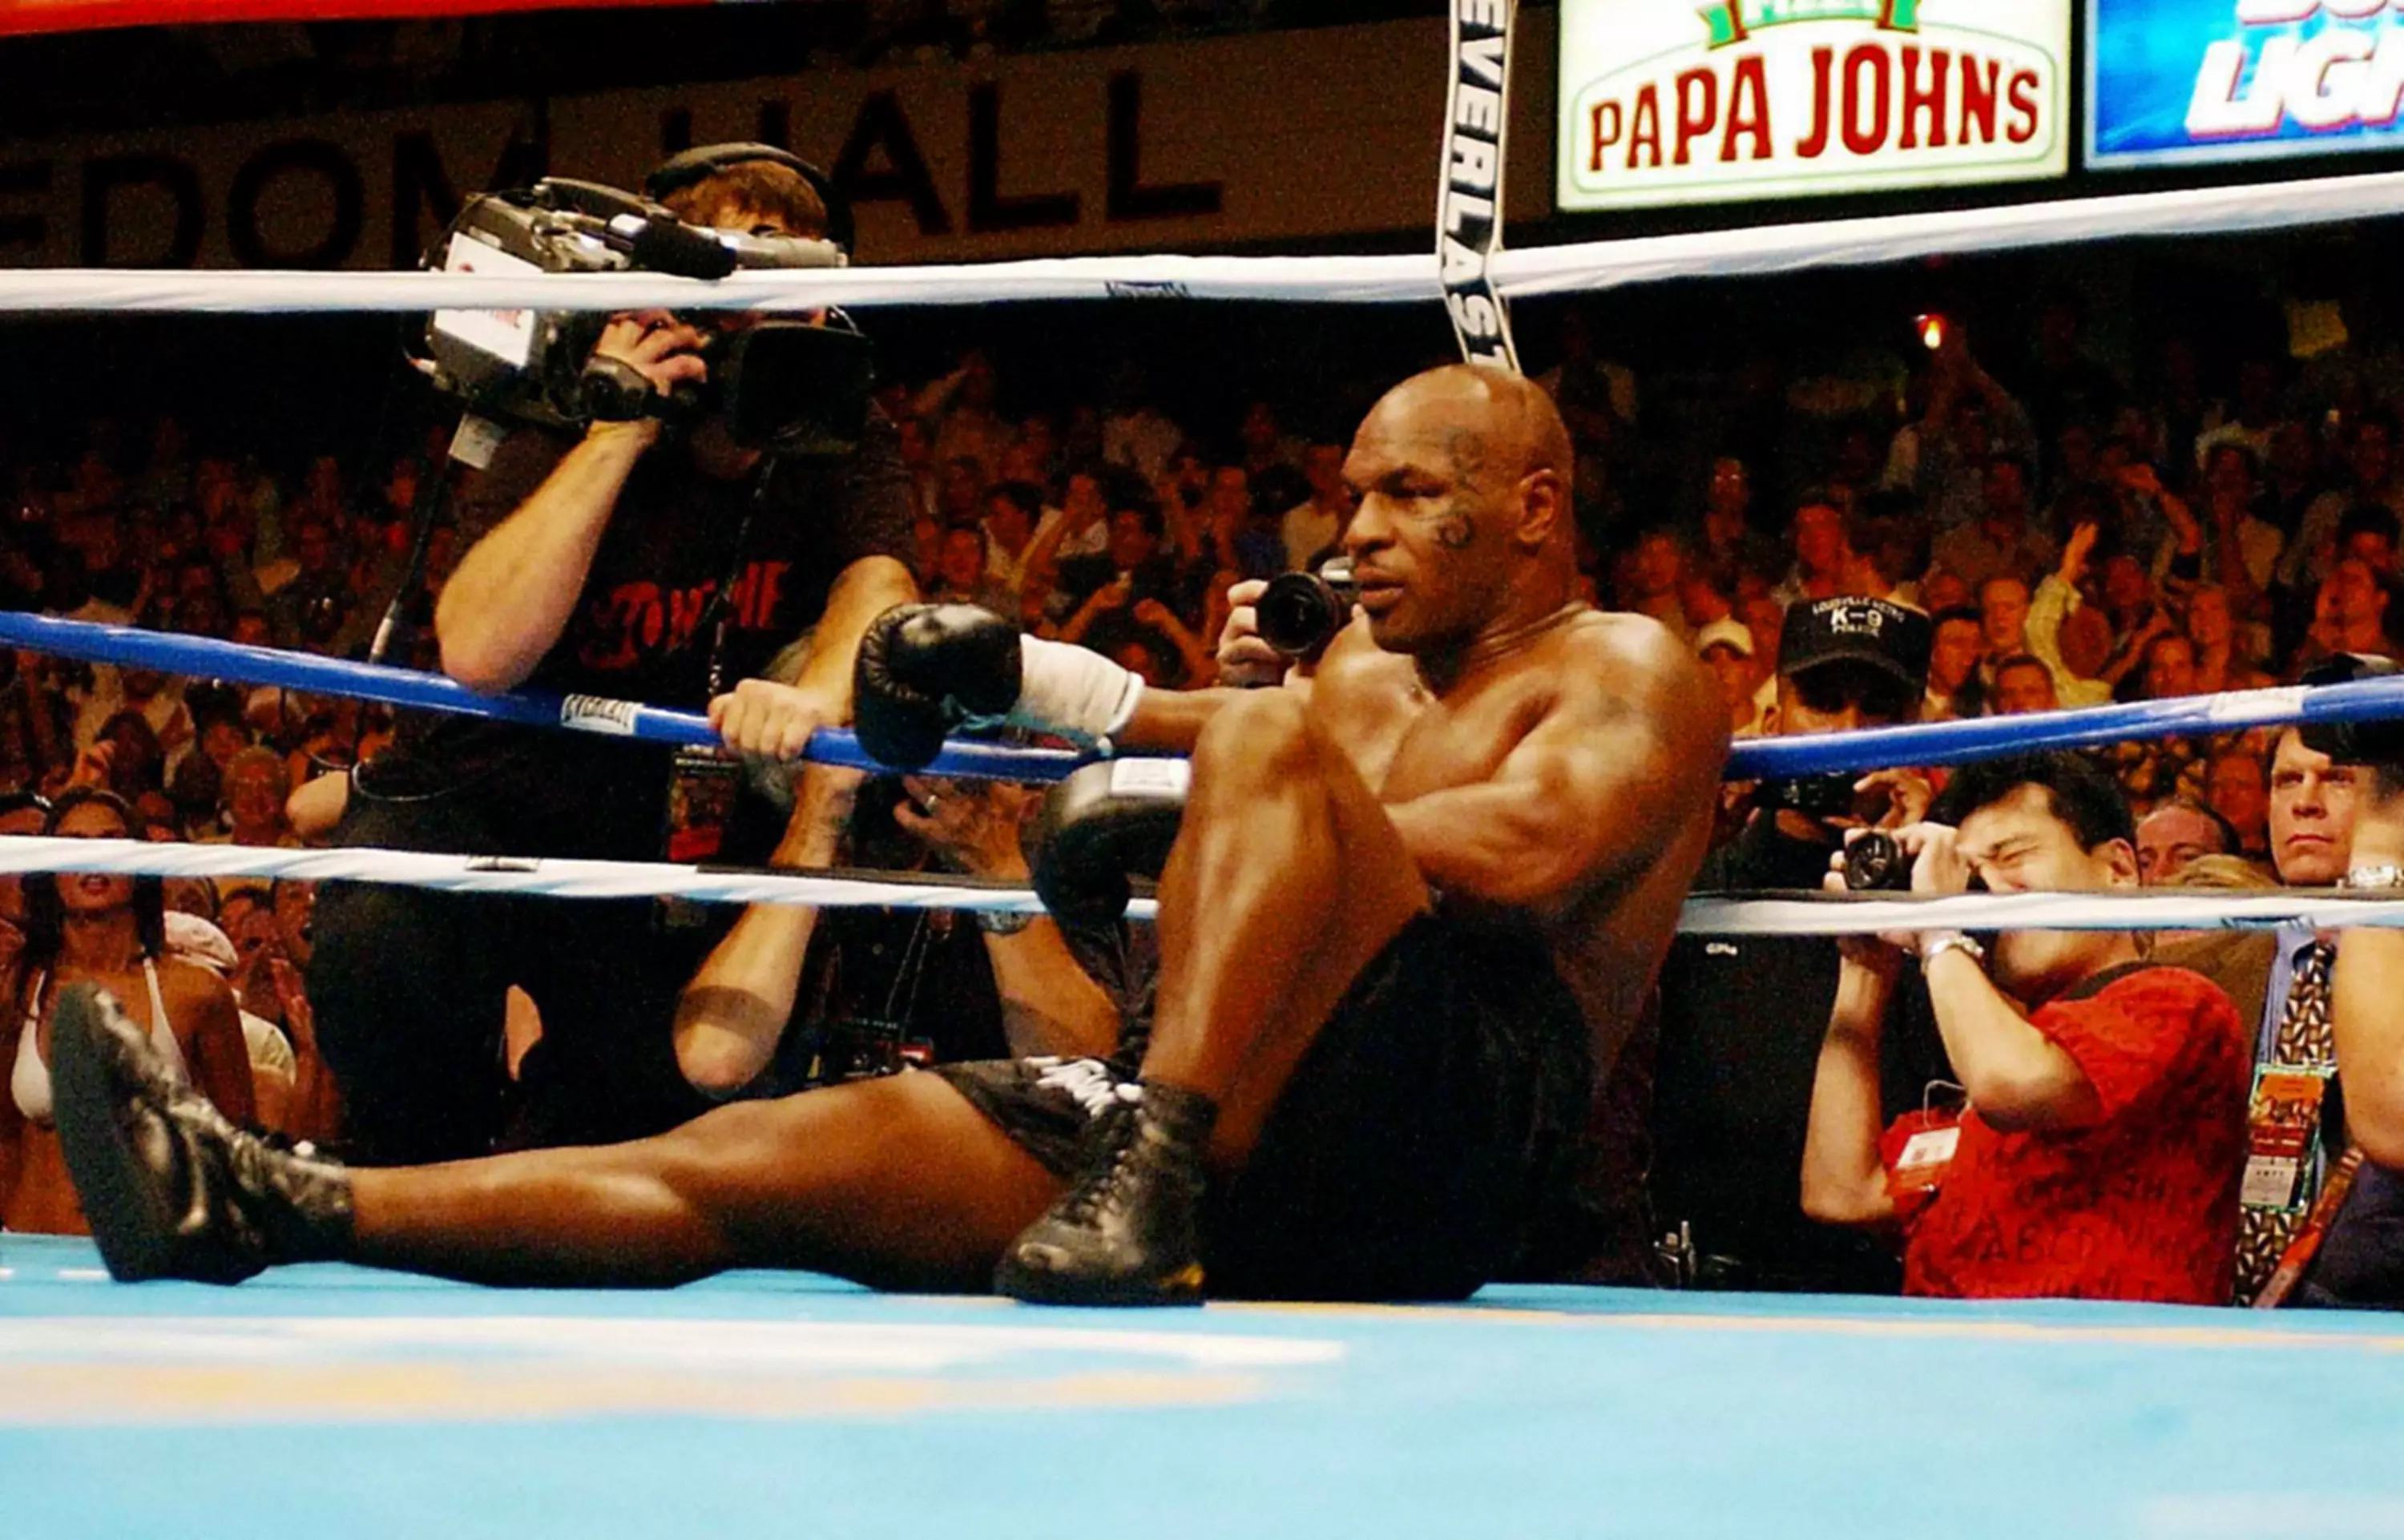 Tyson after being stopped in his penultimate fight against Danny Williams. Image: PA Images